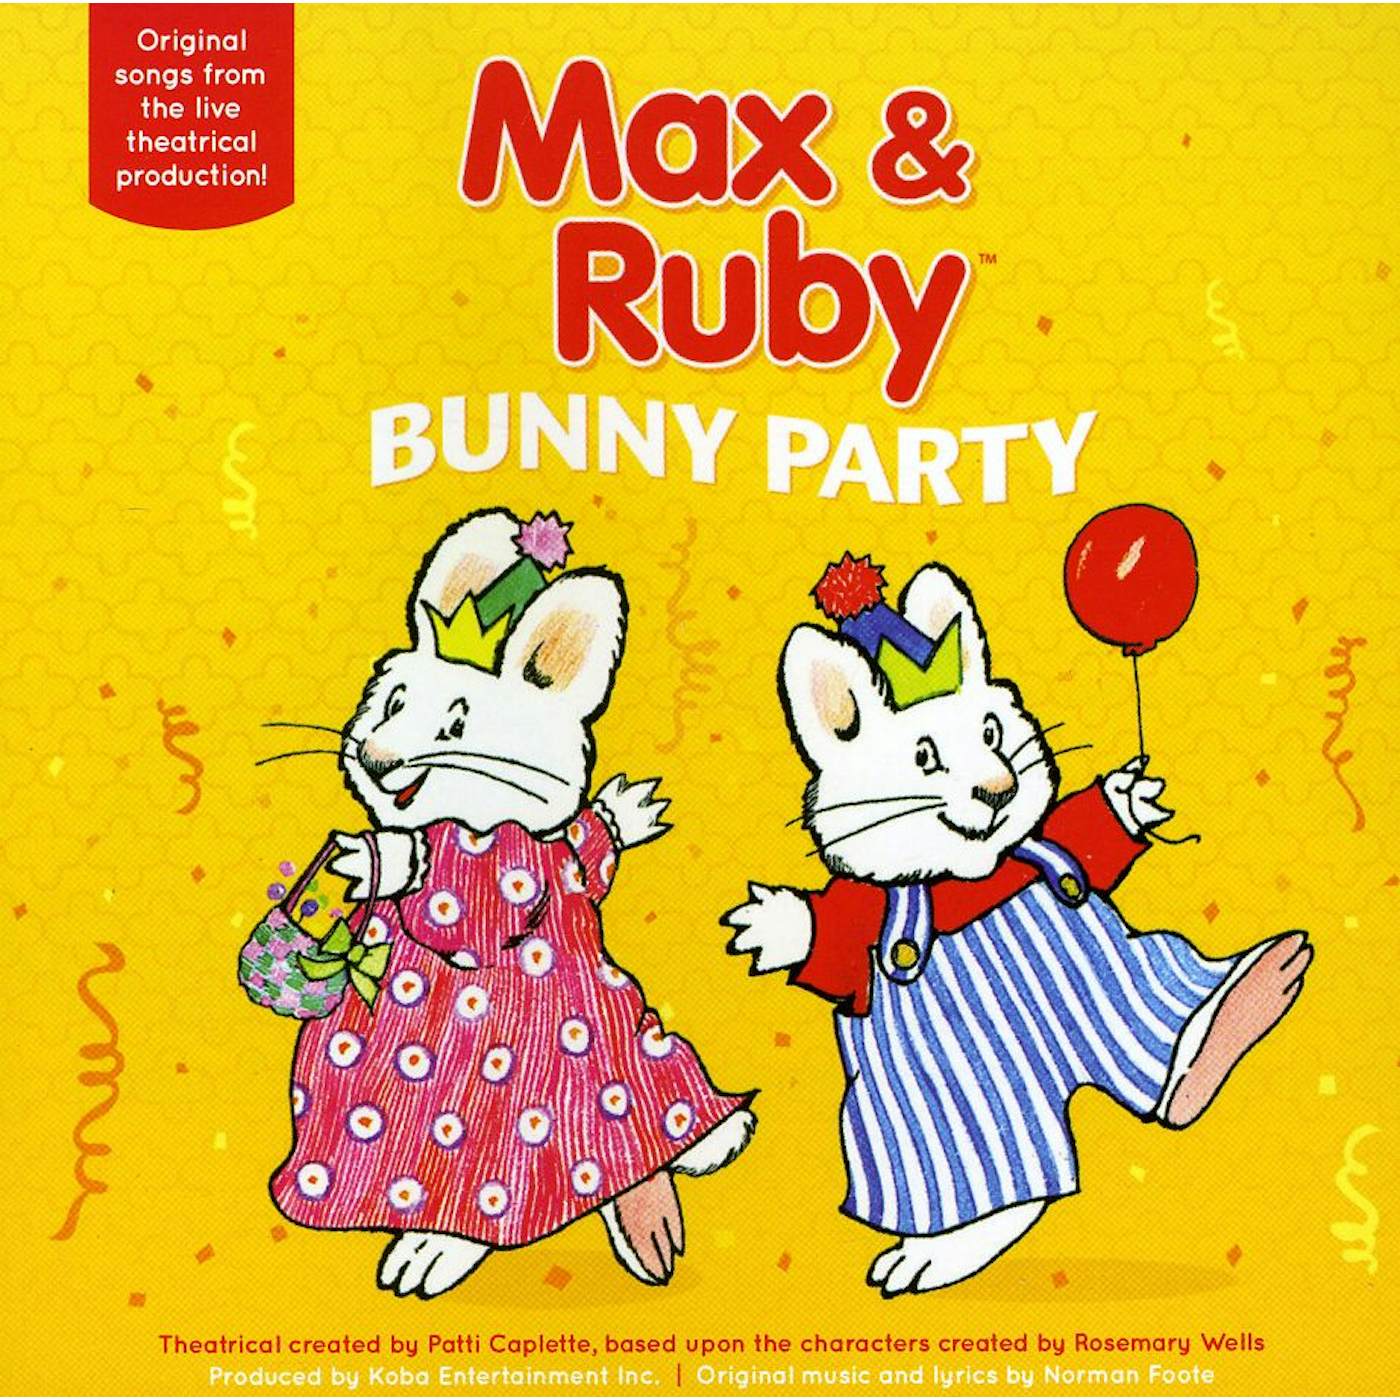 MAX & RUBY BUNNY PARTY CD